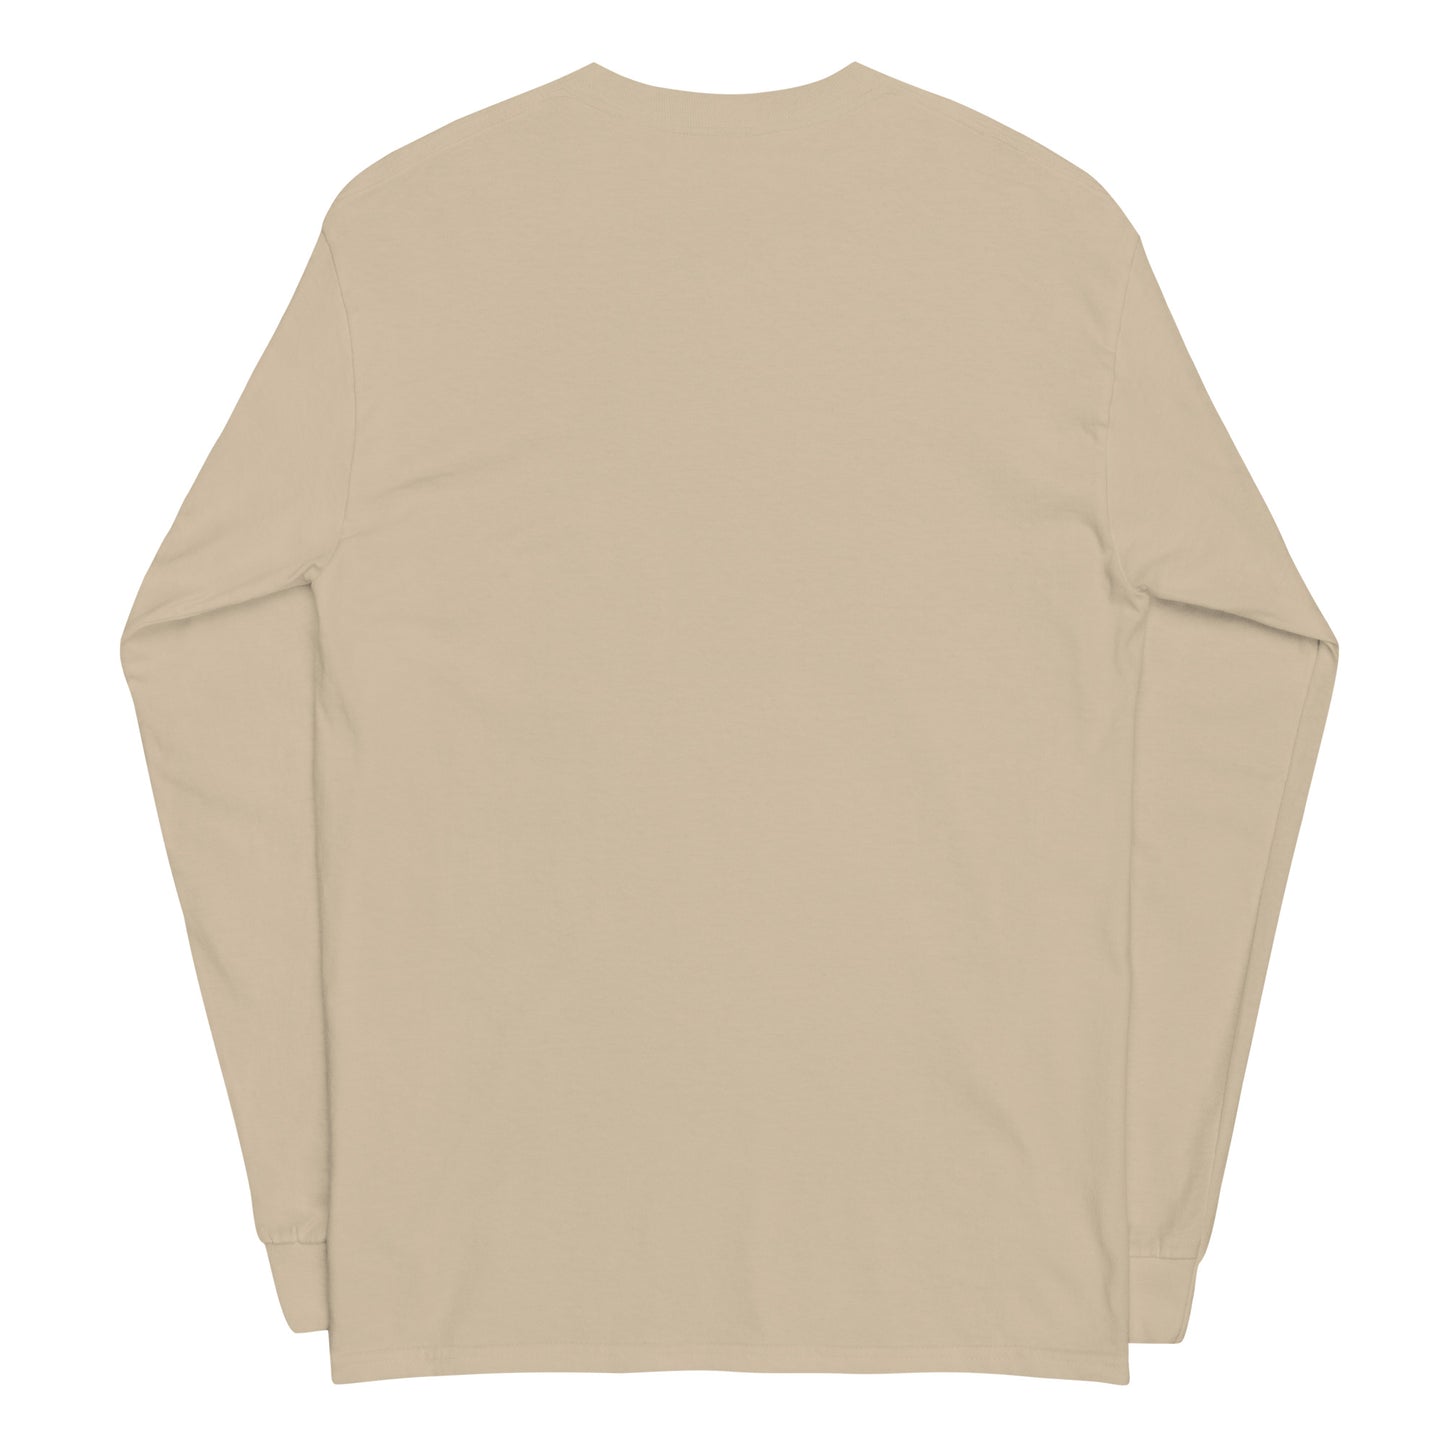 Champion — Oil Painting — on 100% Cotton Long-Sleeve Grey, Tan, Light Blue or White Shirt (No Logo)